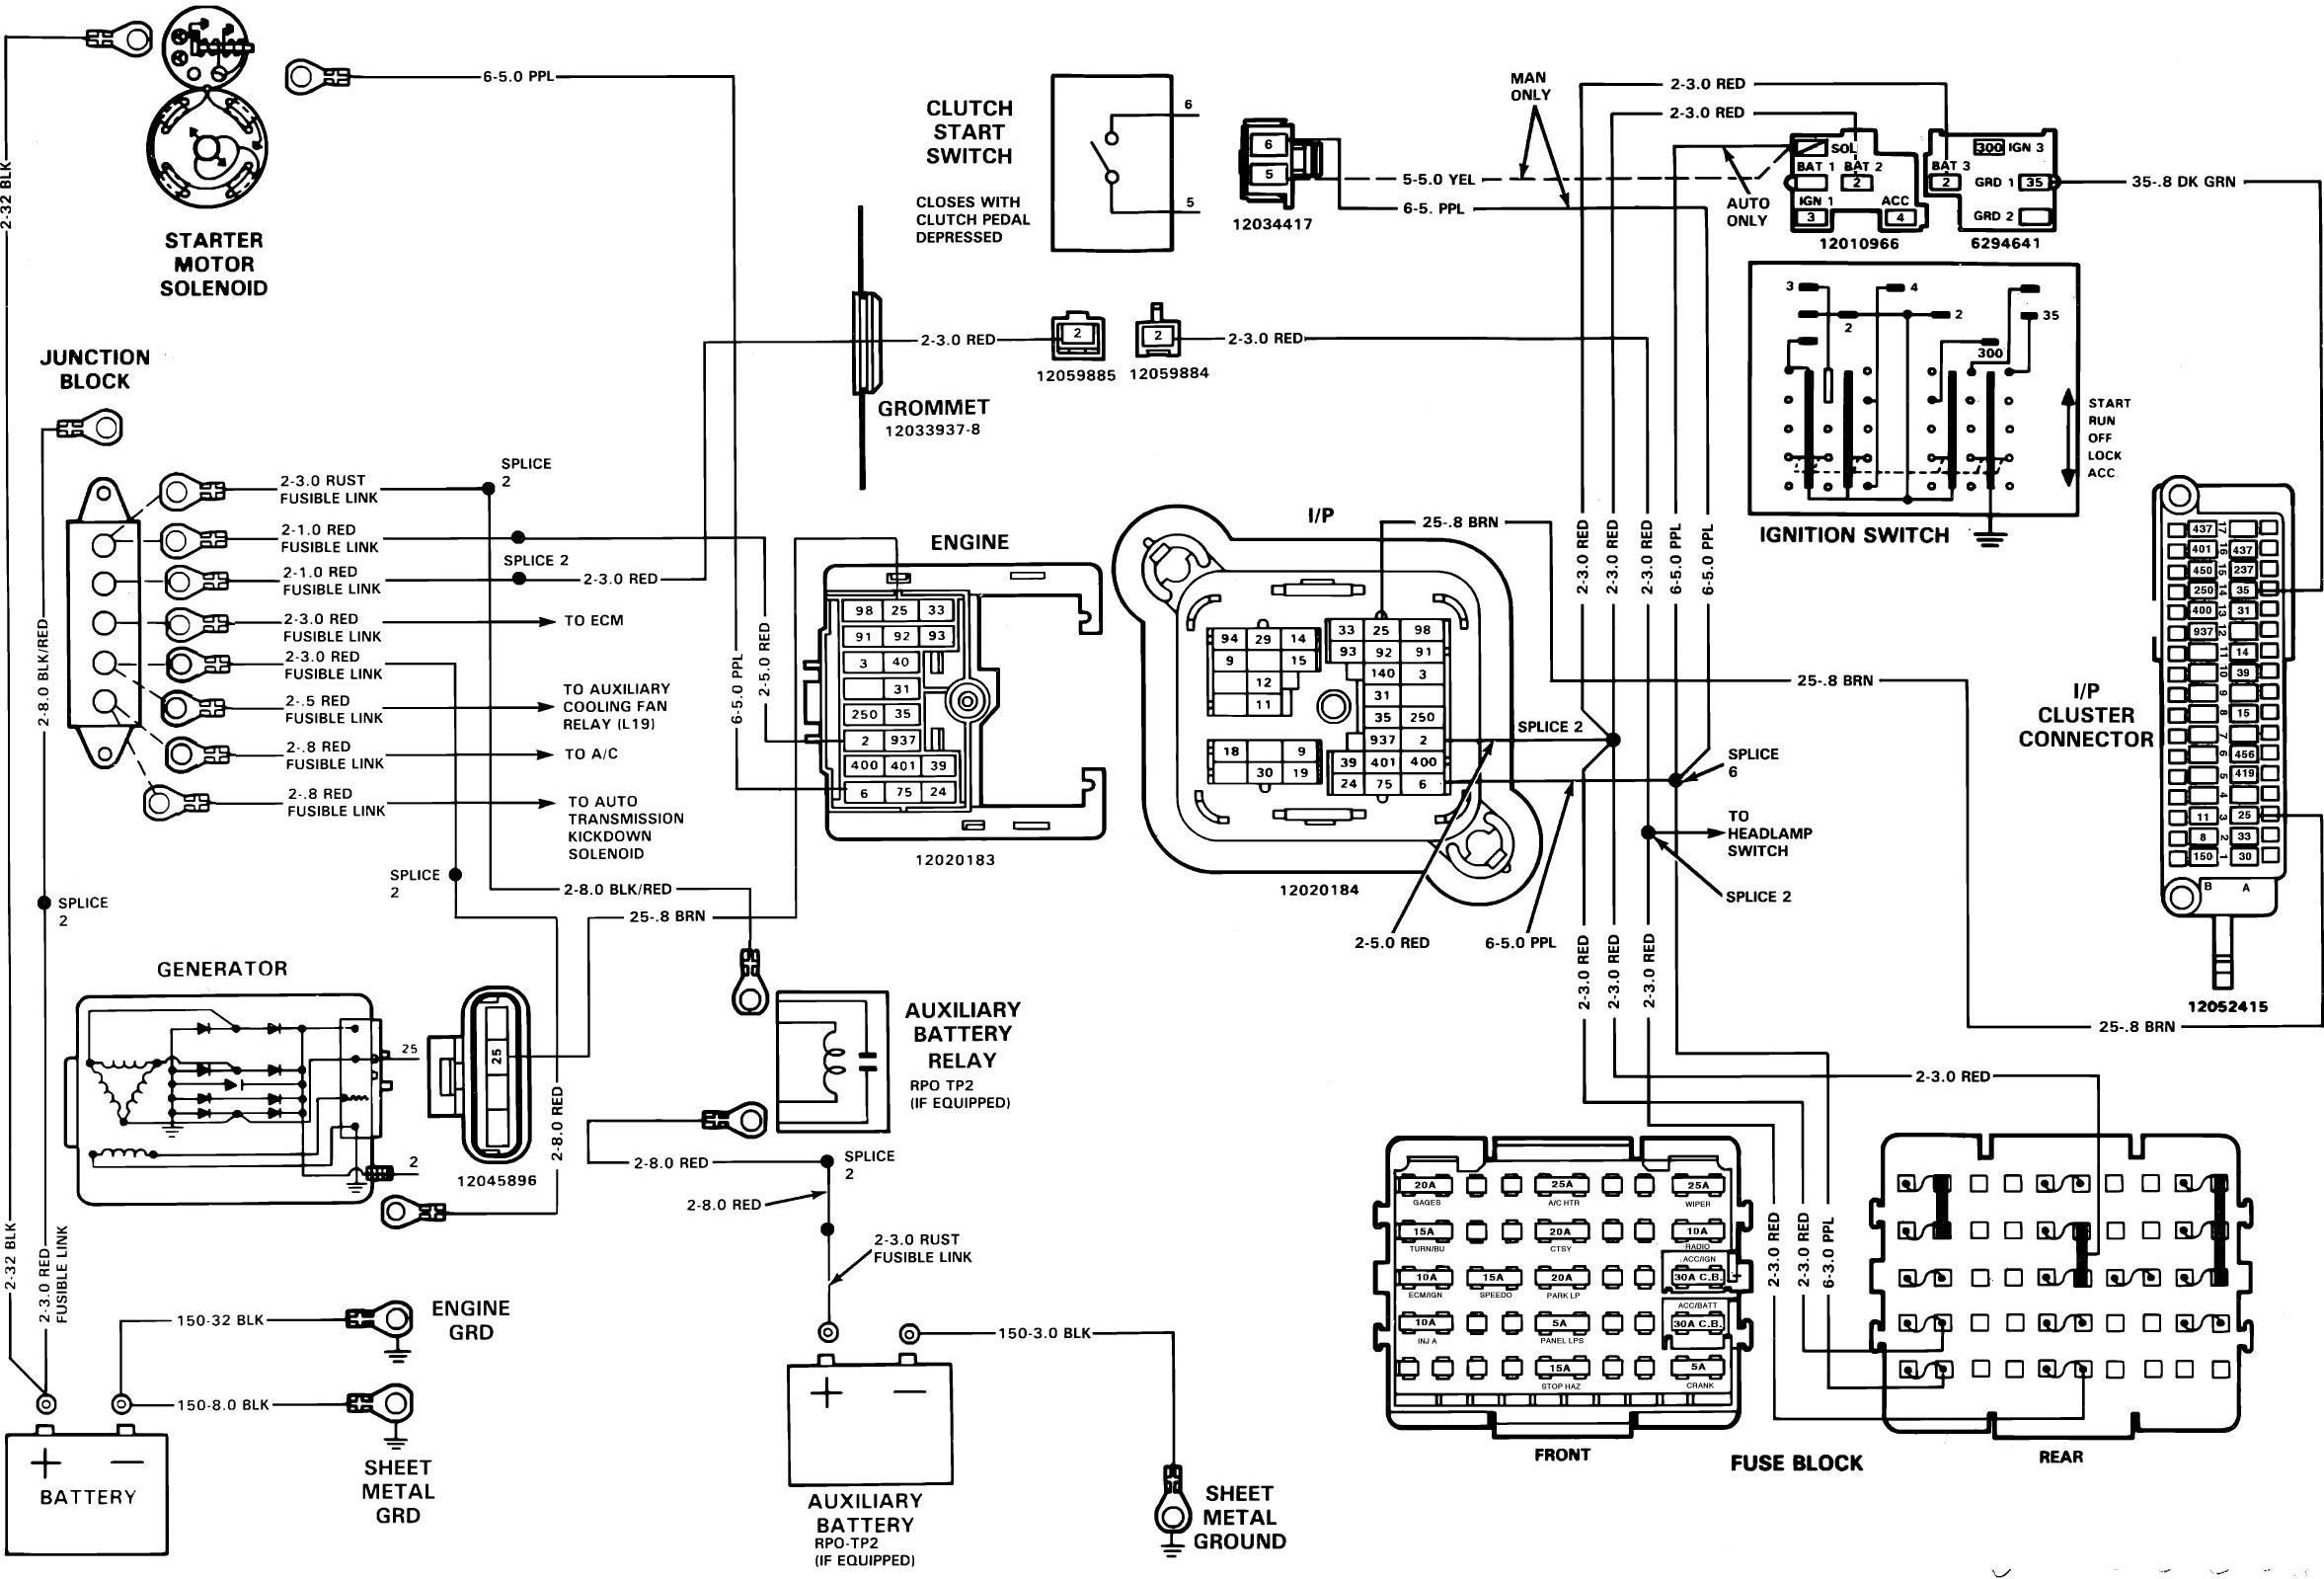 1989 Toyota Pickup Stereo Wiring Diagram from detoxicrecenze.com